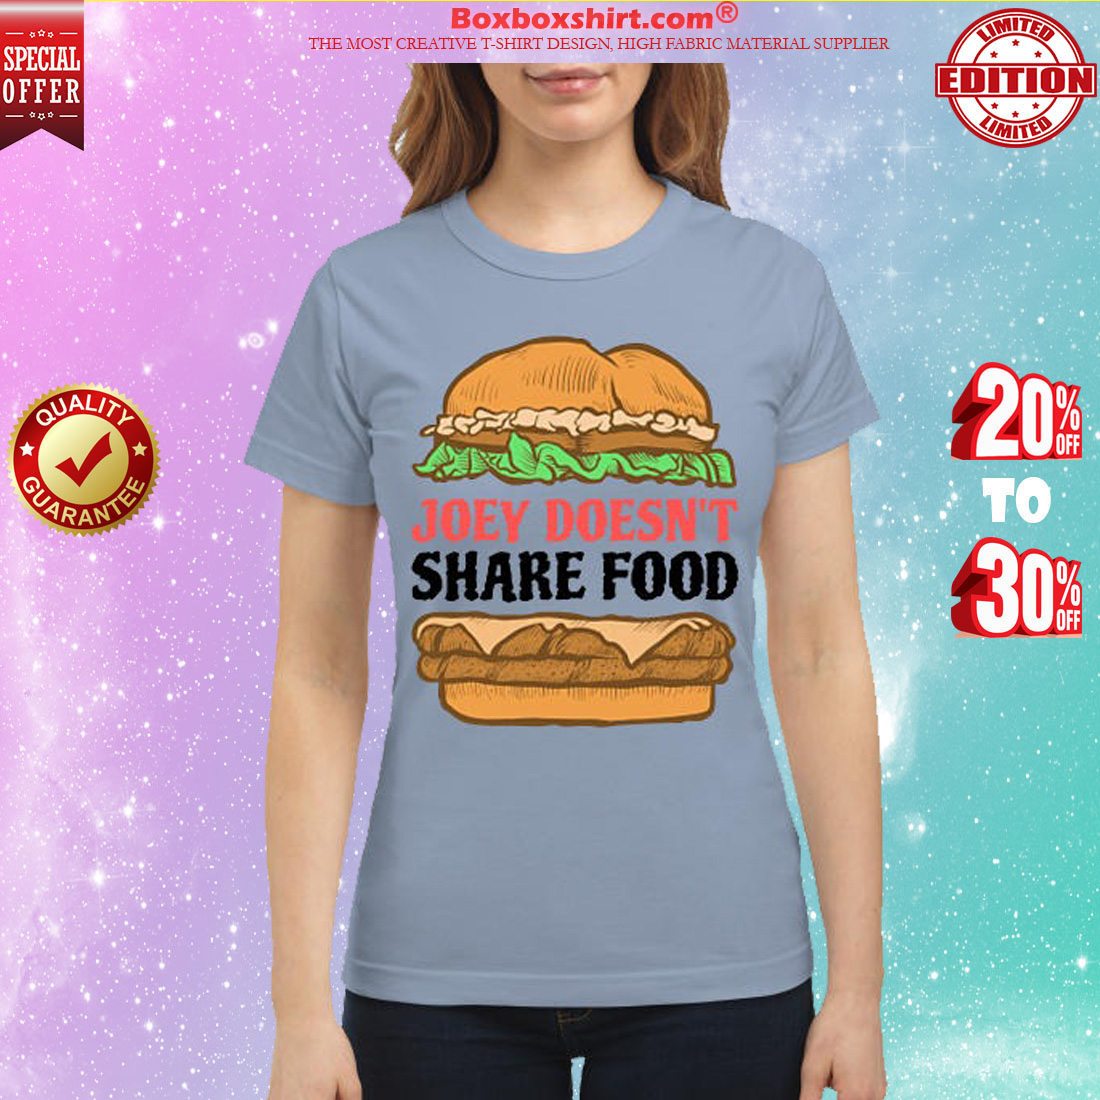 Joey doesn't share food classic shirt